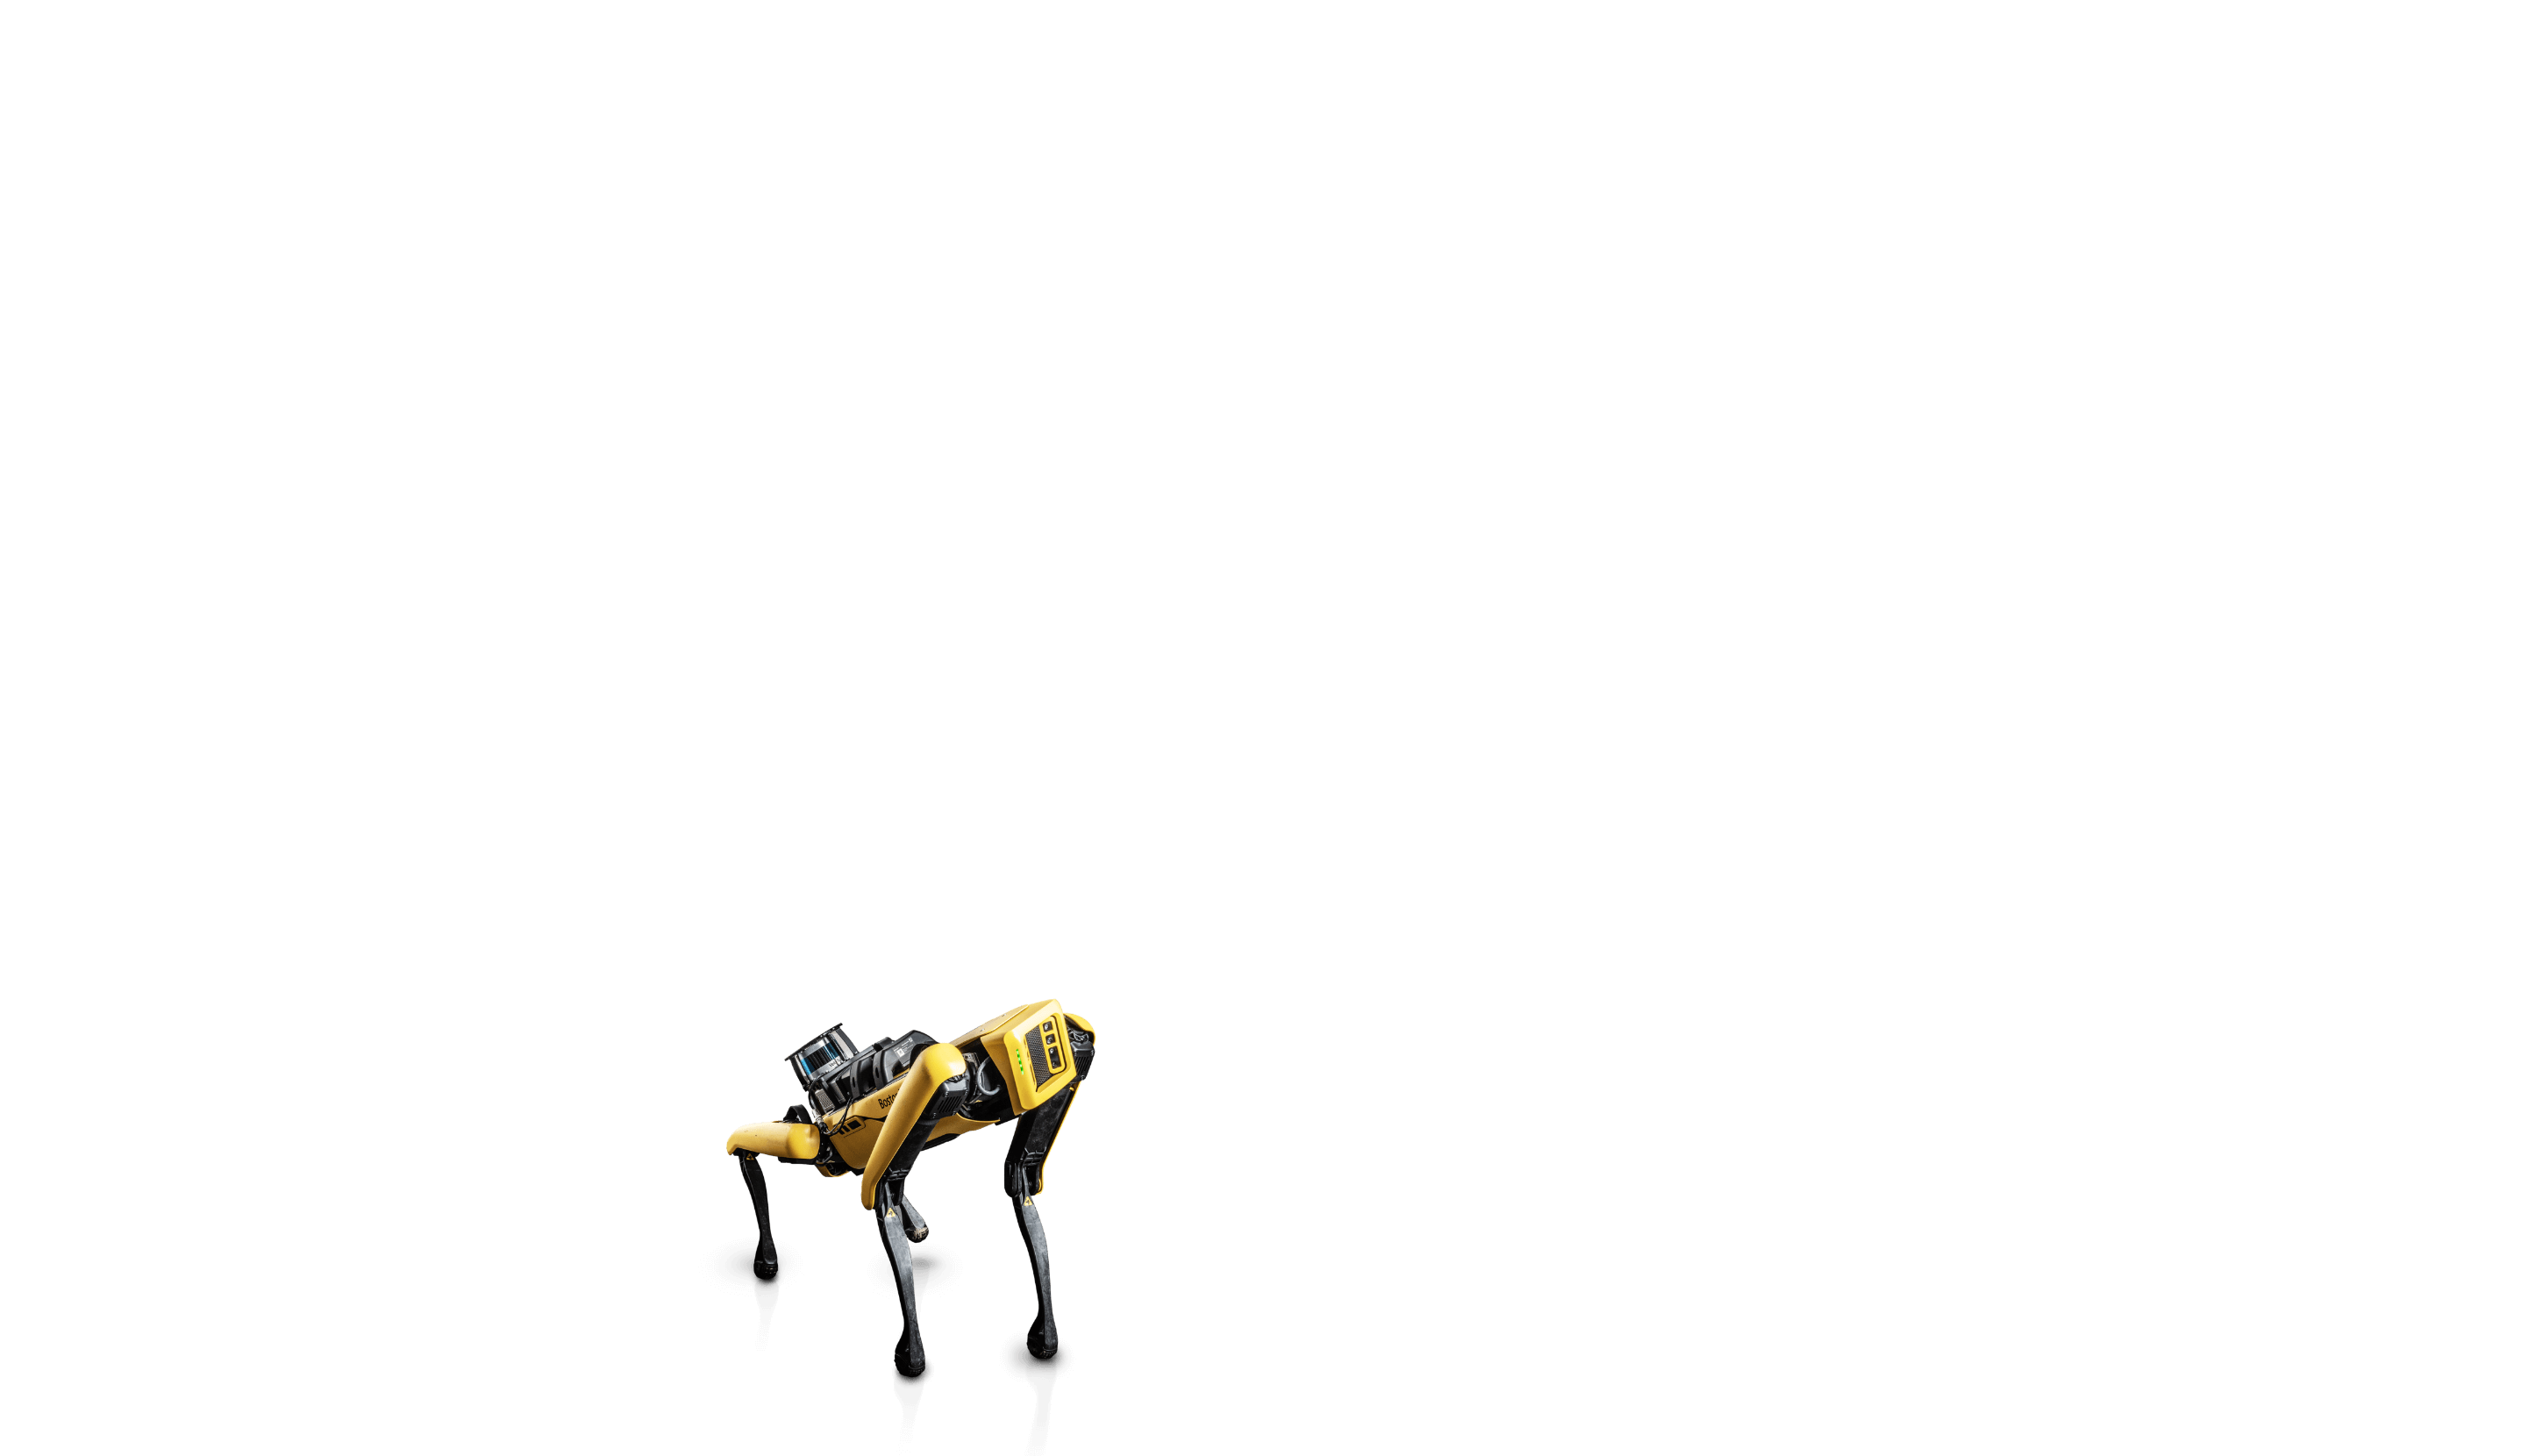 Spot, the yellow and black robotic dog created by Boston Dynamics.